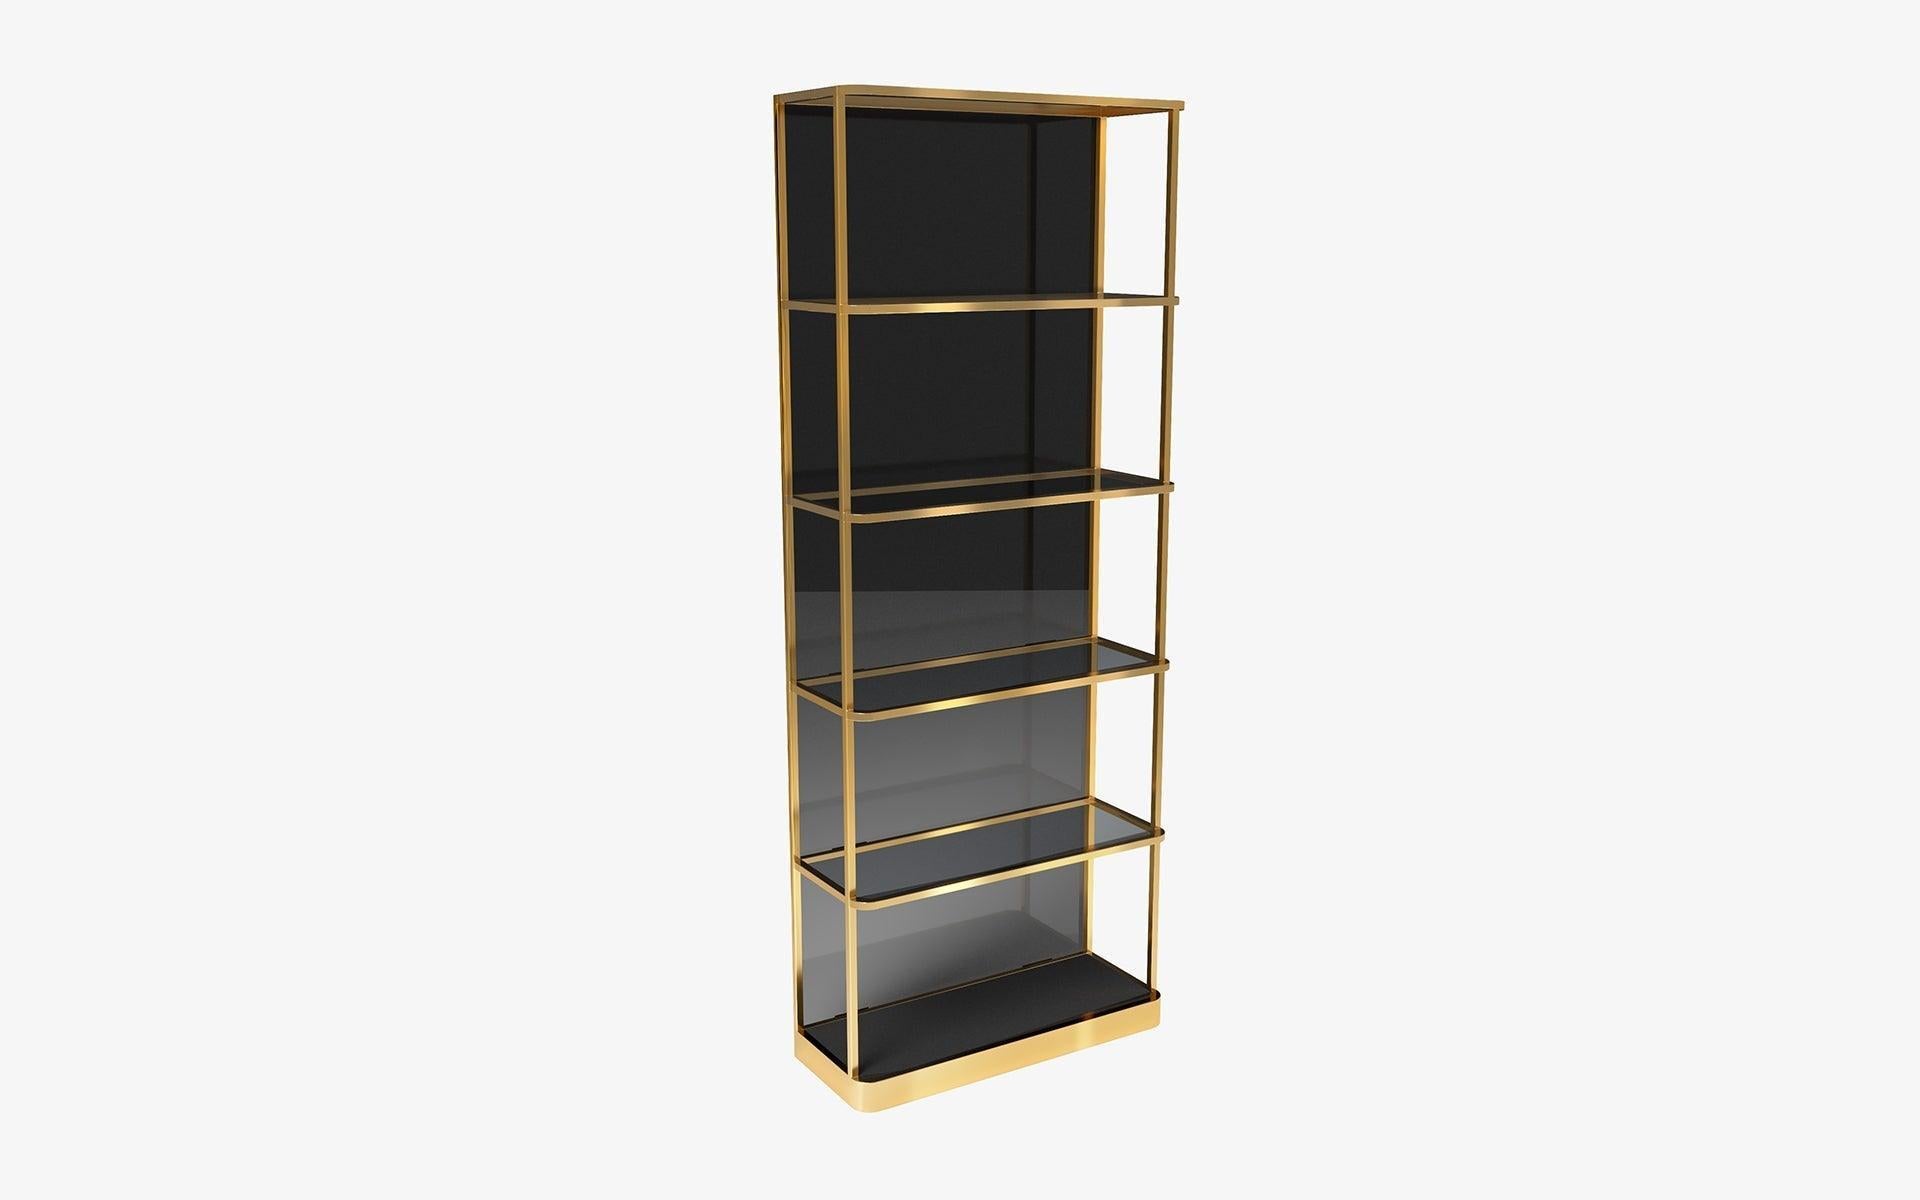 The CURVE SHELF SYSTEM, emphasizing the subtle elegance of brass with its elegant curve details on its corners, impresses in your space...

Width: 90 cm / 35.4 inch
Depth: 40 cm / 15.7 inch
Height: 240 cm / 94.5 inch

Real Brass Skeleton
Smoked